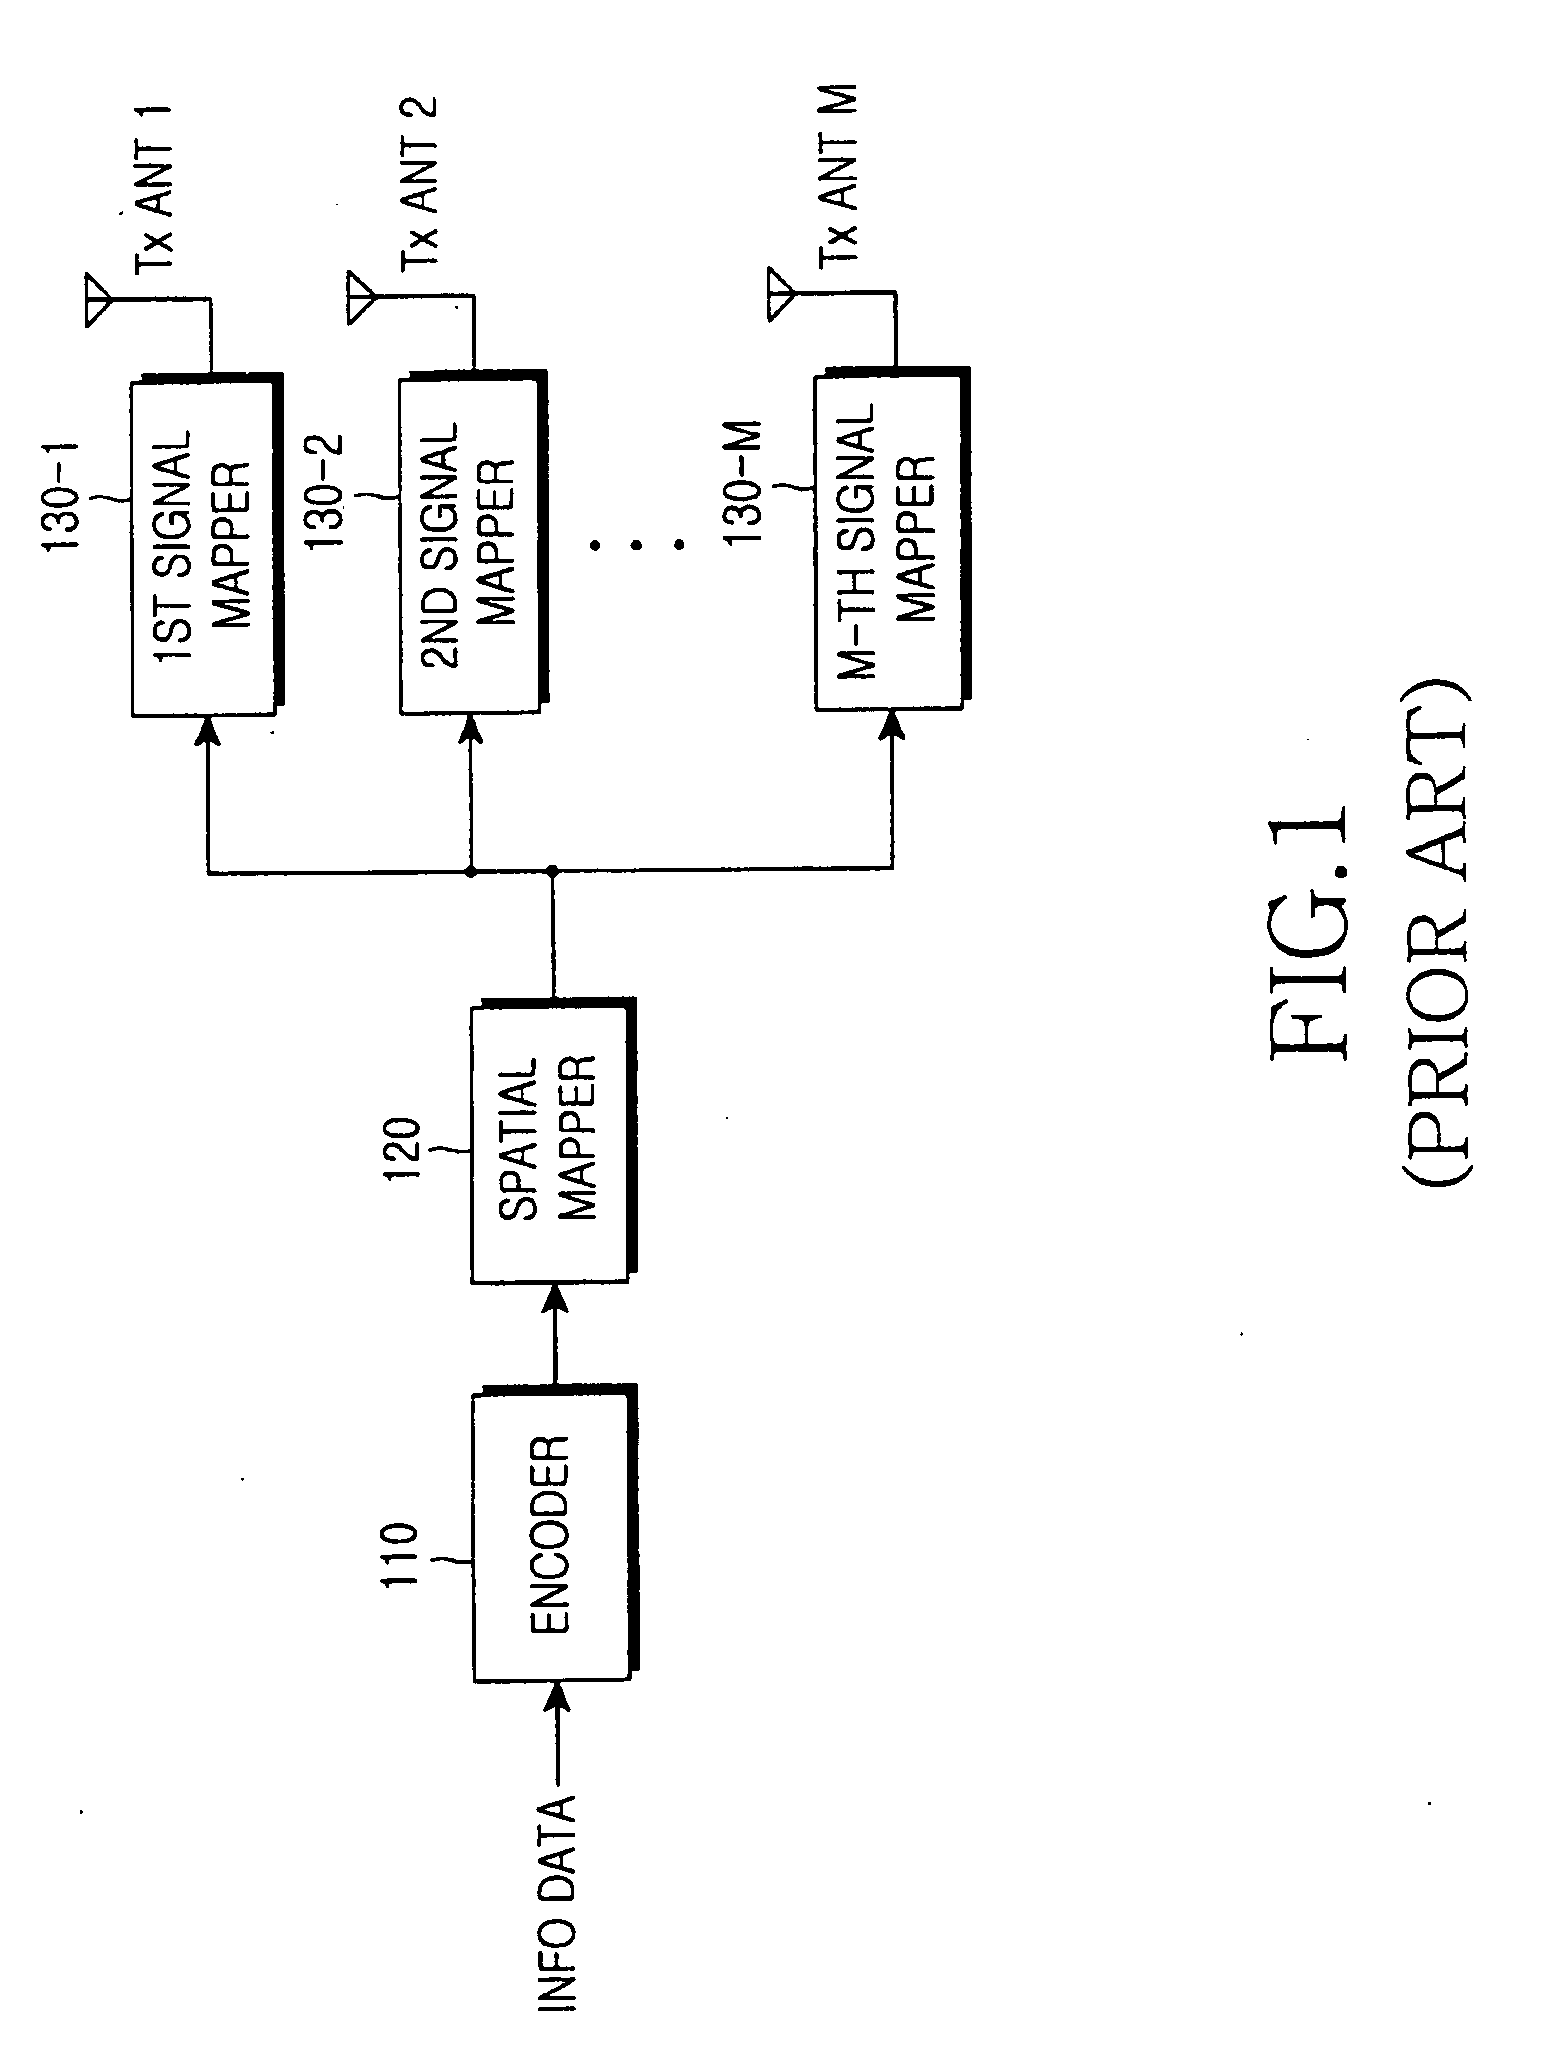 Apparatus and method for transmitting/receiving data in a communication system using structured low density parity check code